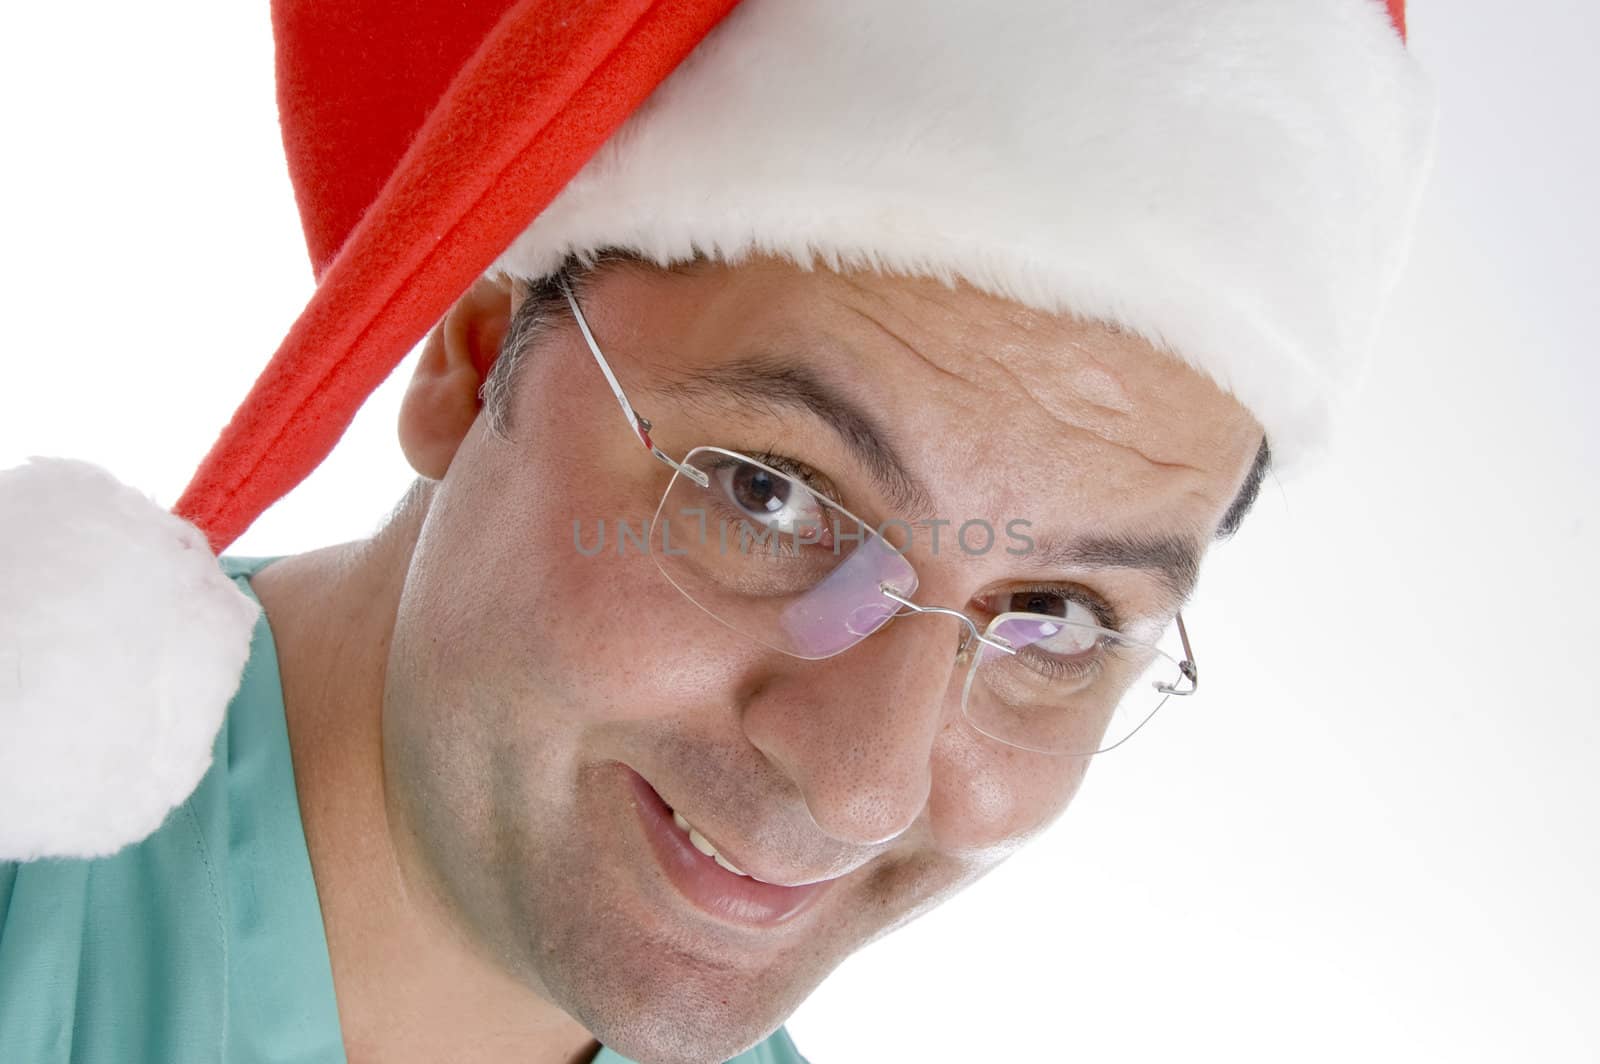 doctor wearing christmas hat against white background